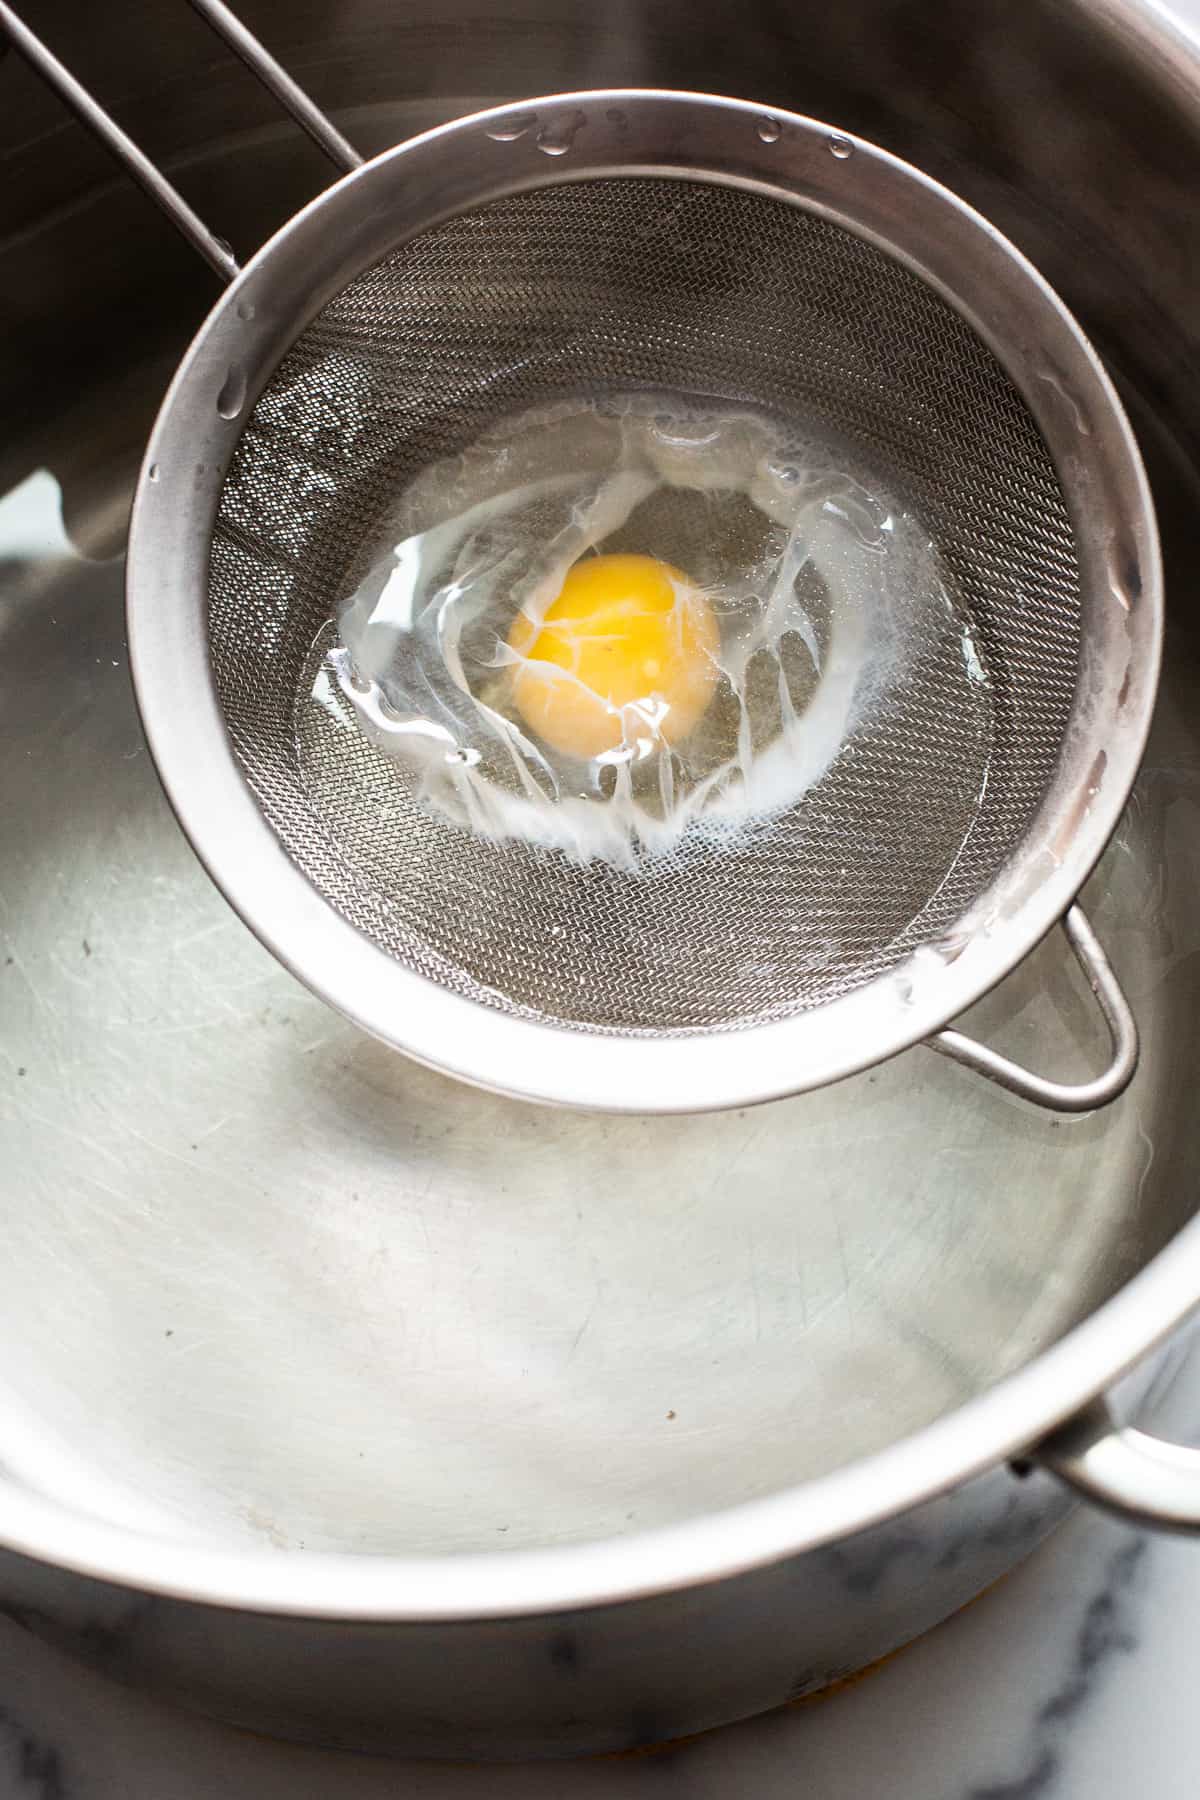 Raw egg in a mesh strainer being put in a pot of boiling water.